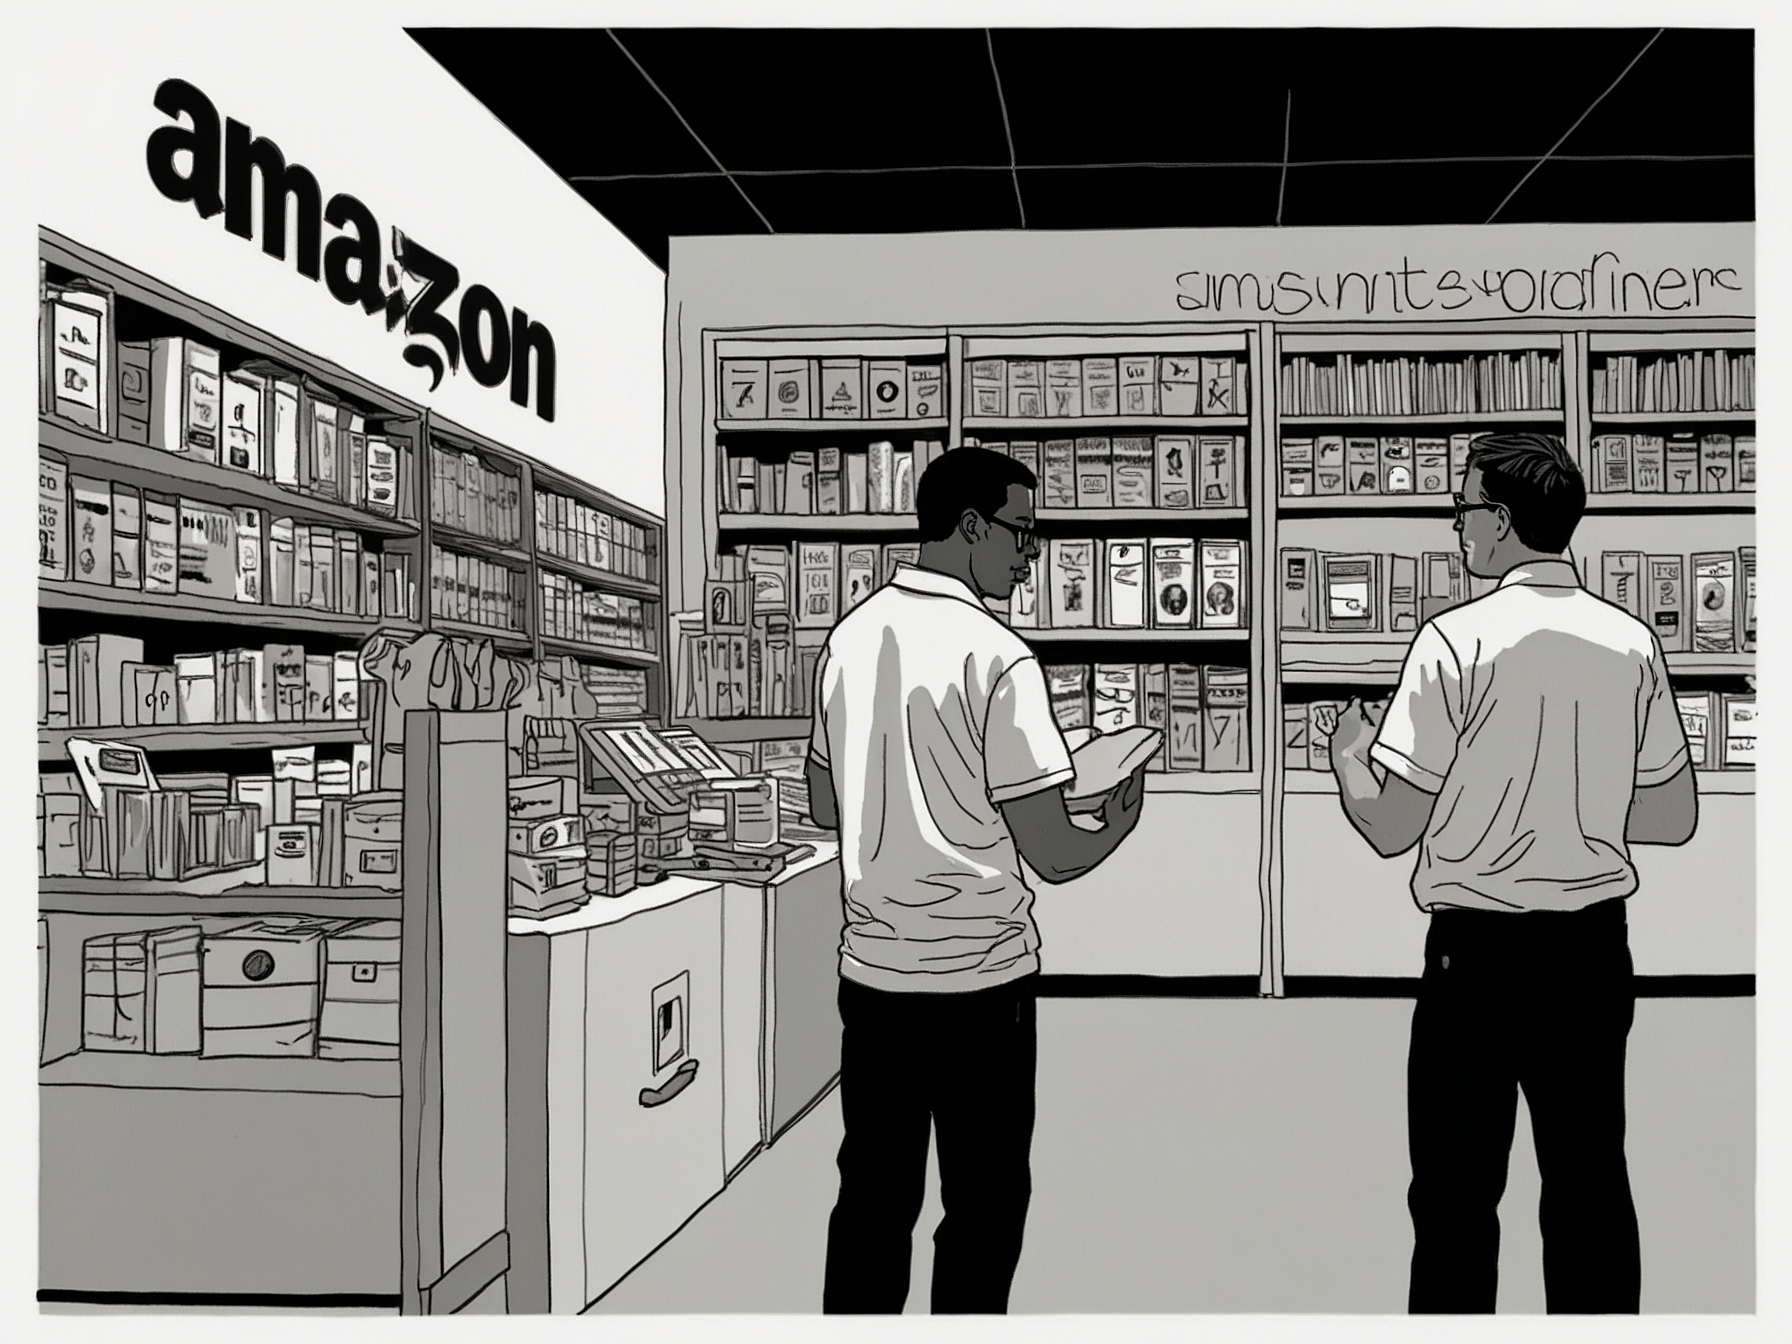 An illustration showing early 2000s Amazon, highlighting key aspects like customer service, innovation, and the launch of Amazon Prime, which emphasized long-term growth over immediate profit.